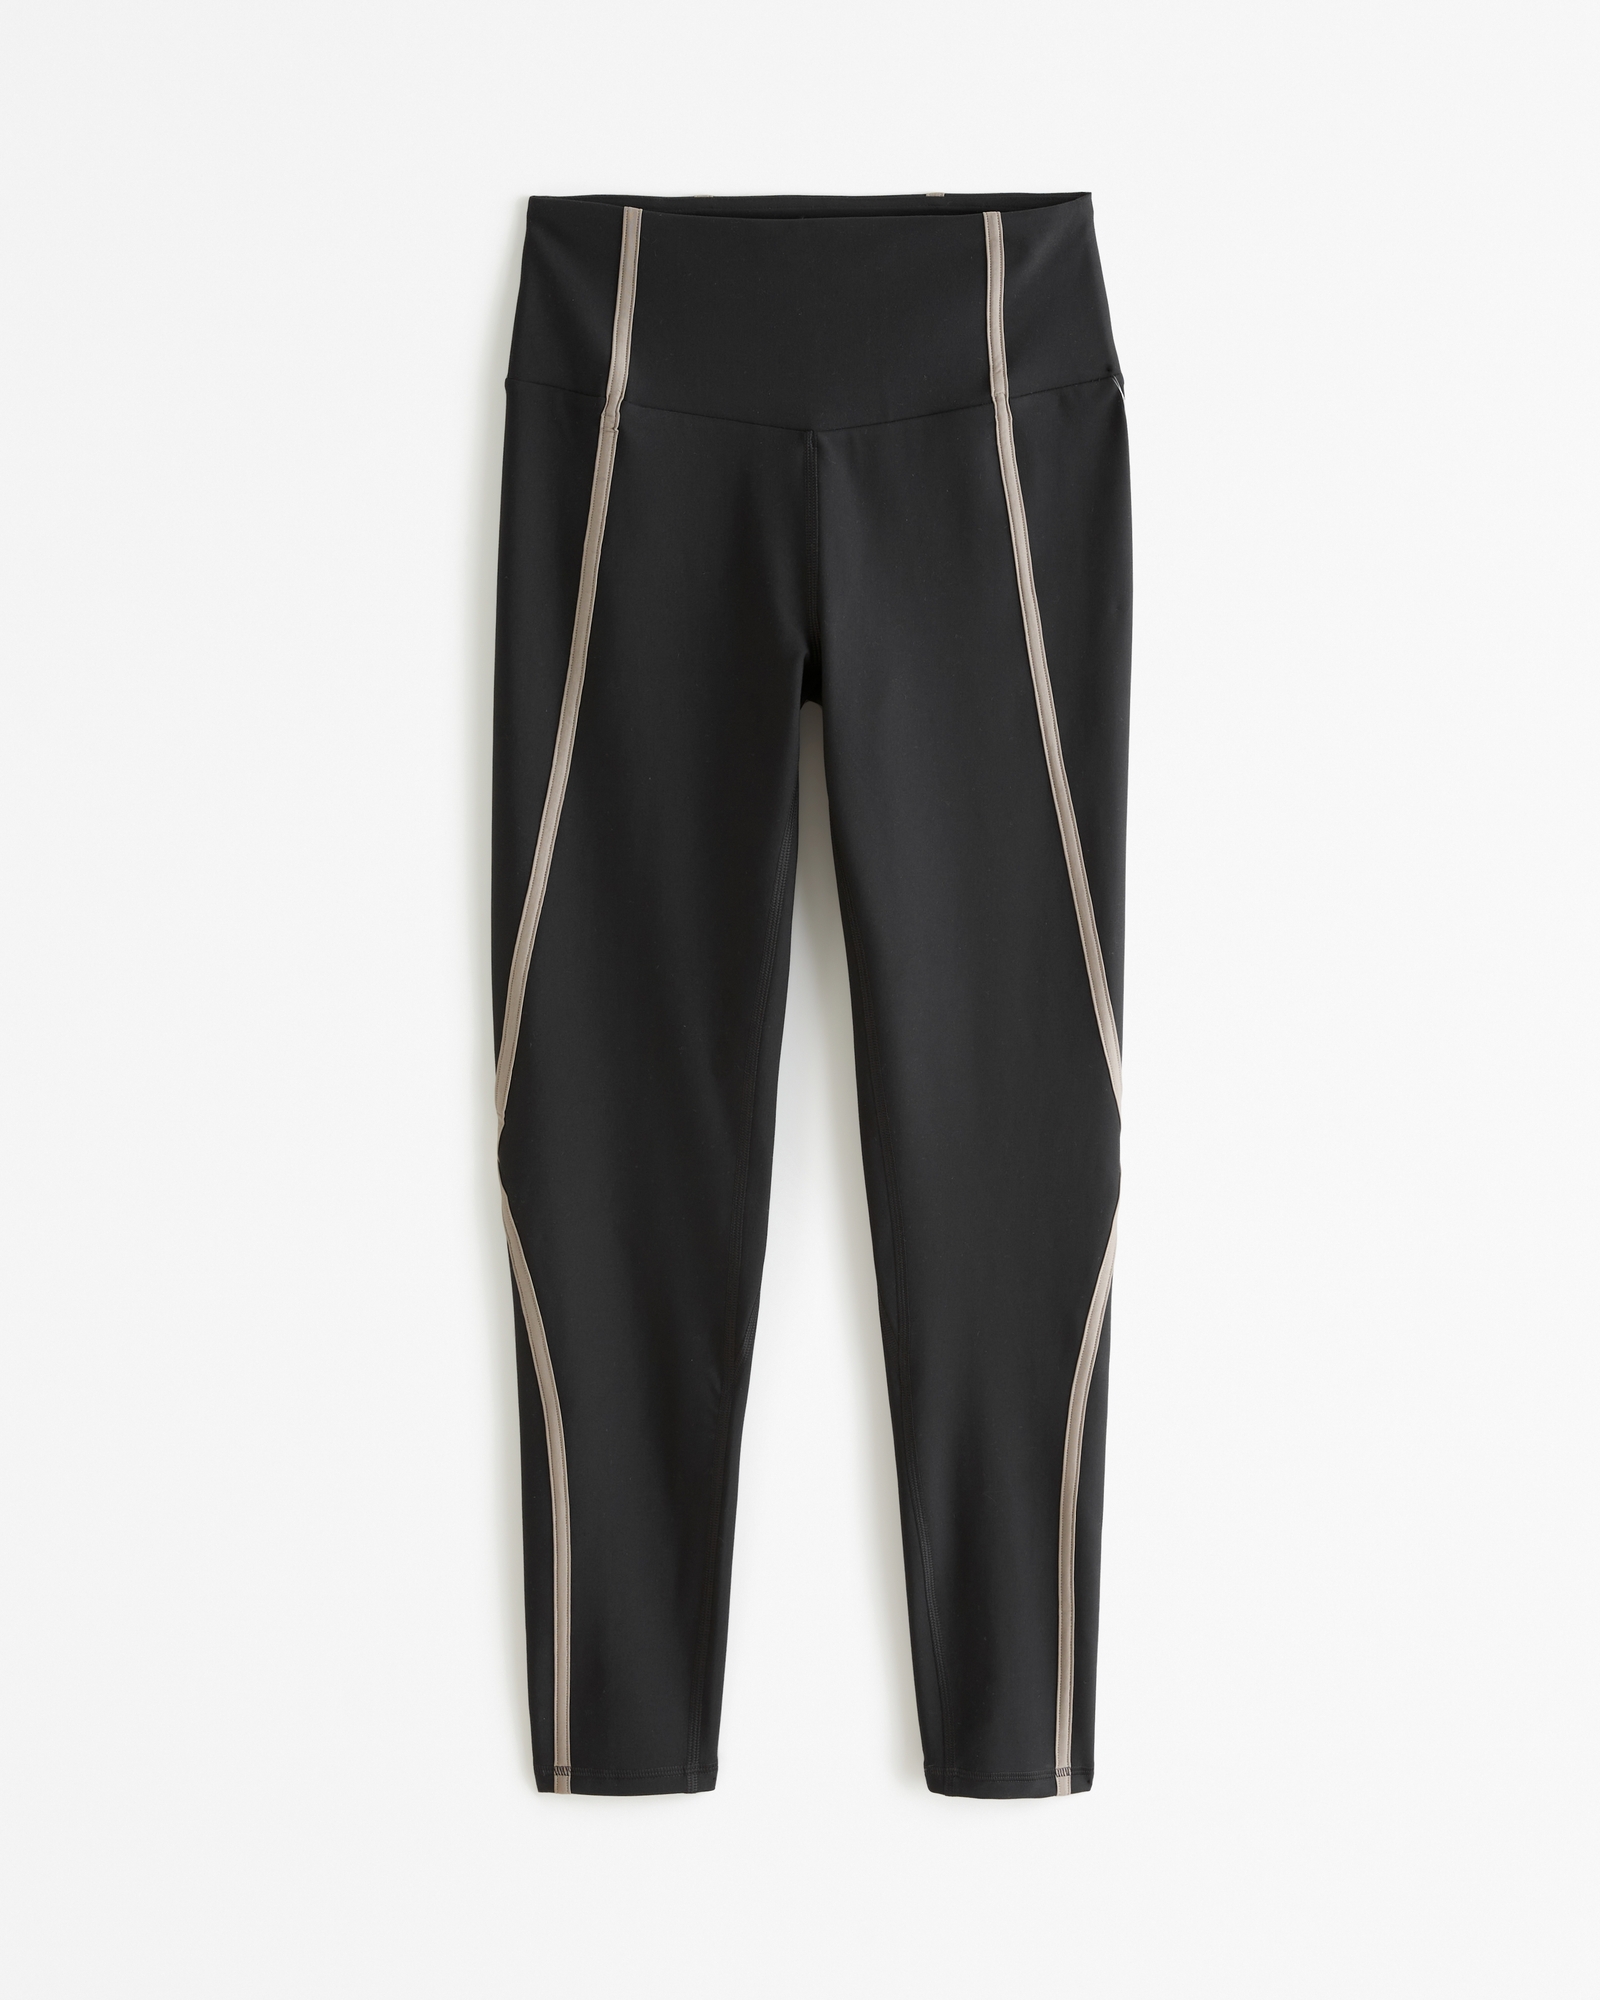 Lululemon Speed Tight ll *Full-On Luxtreme Black 2 - $100 - From Fried